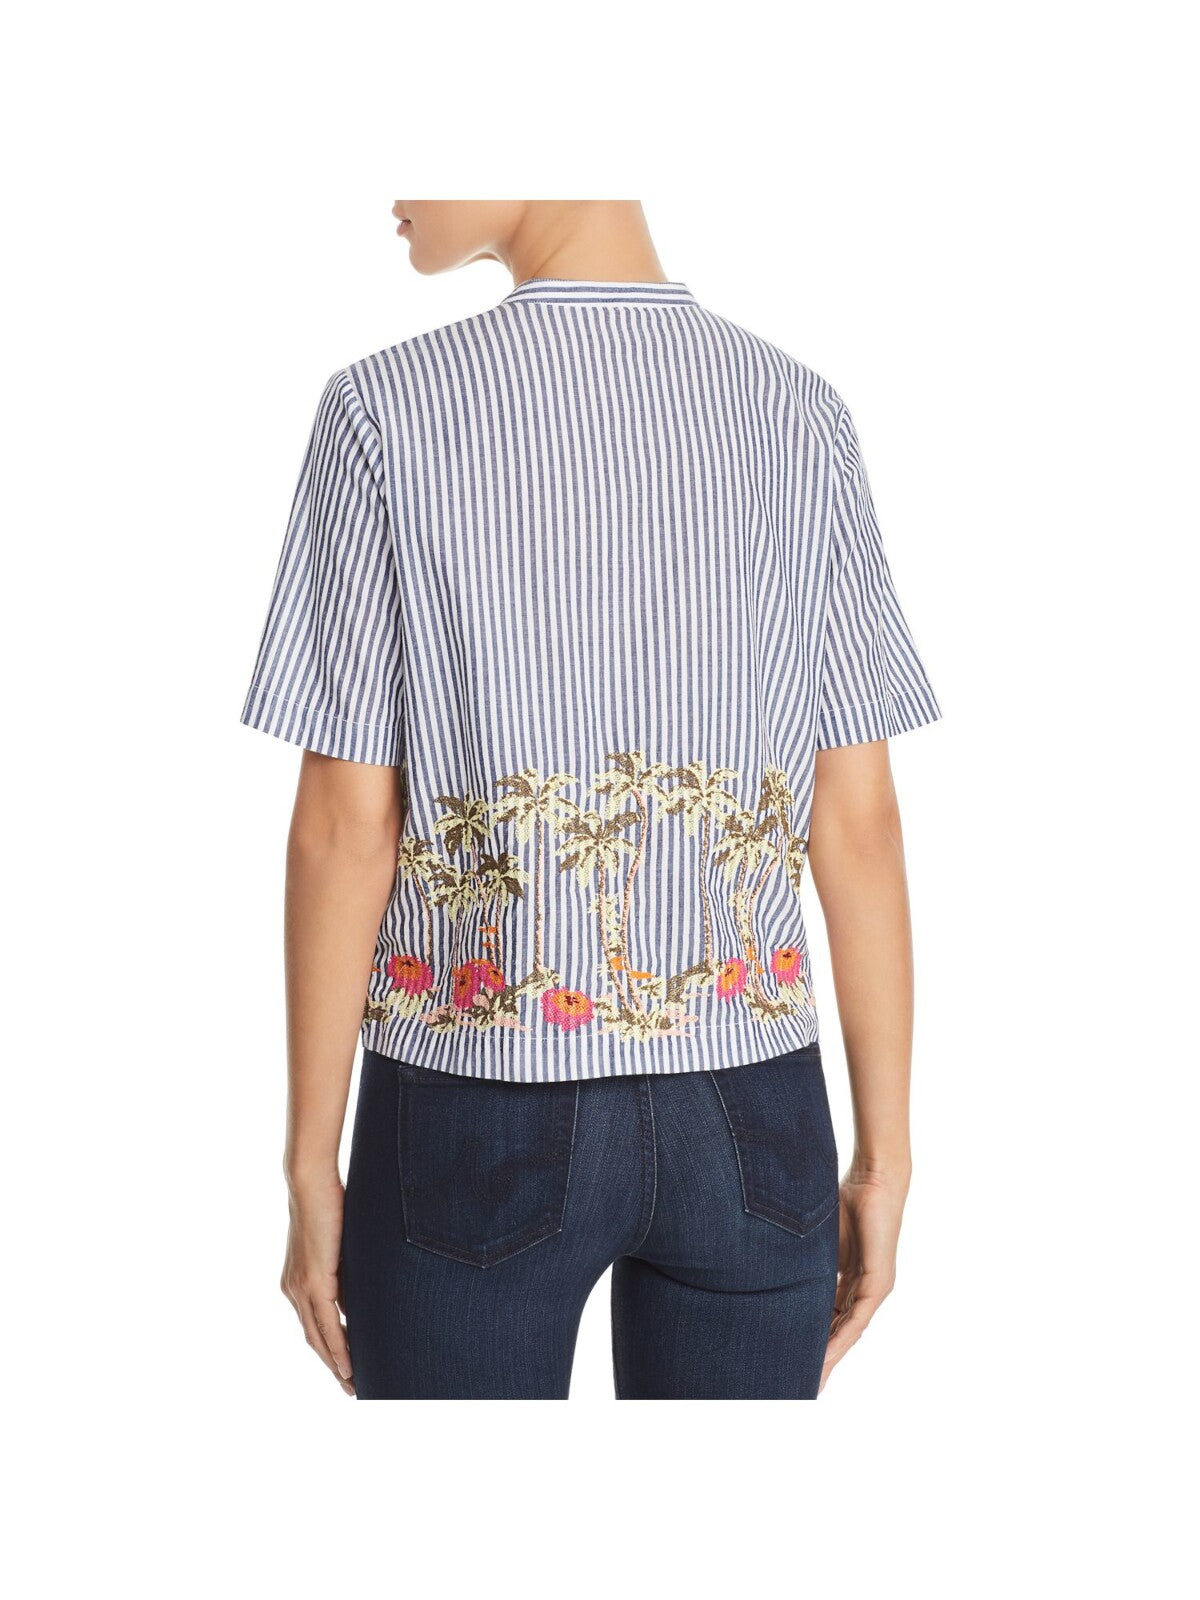 SCOTCH & SODA Womens Embroidered Side Vents Button Short Sleeve Crew Neck Top